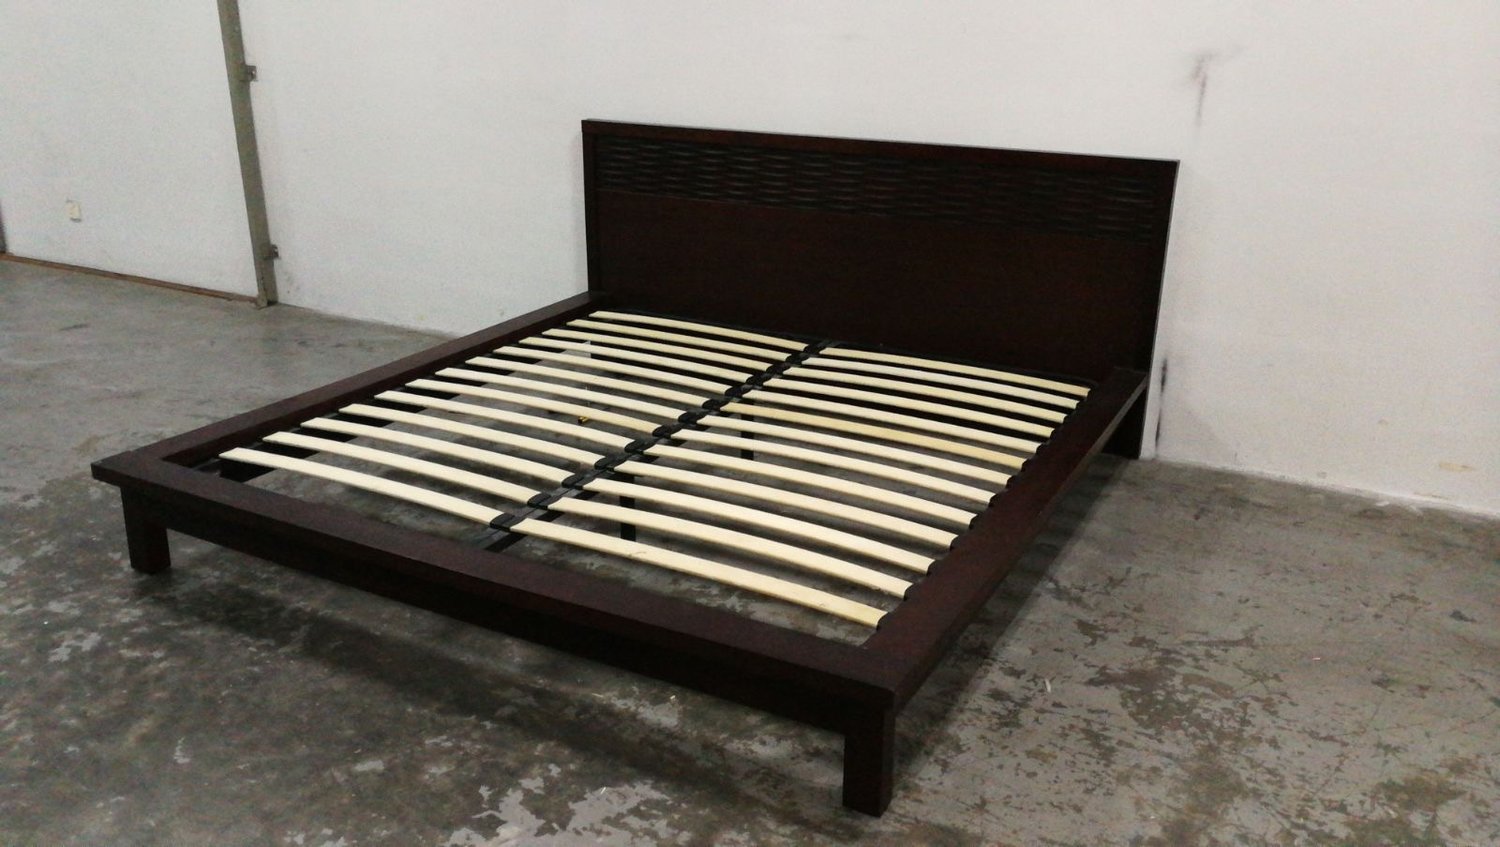 A Used Solid Wood King Size Bed Frame, Used King Size Bed Frame